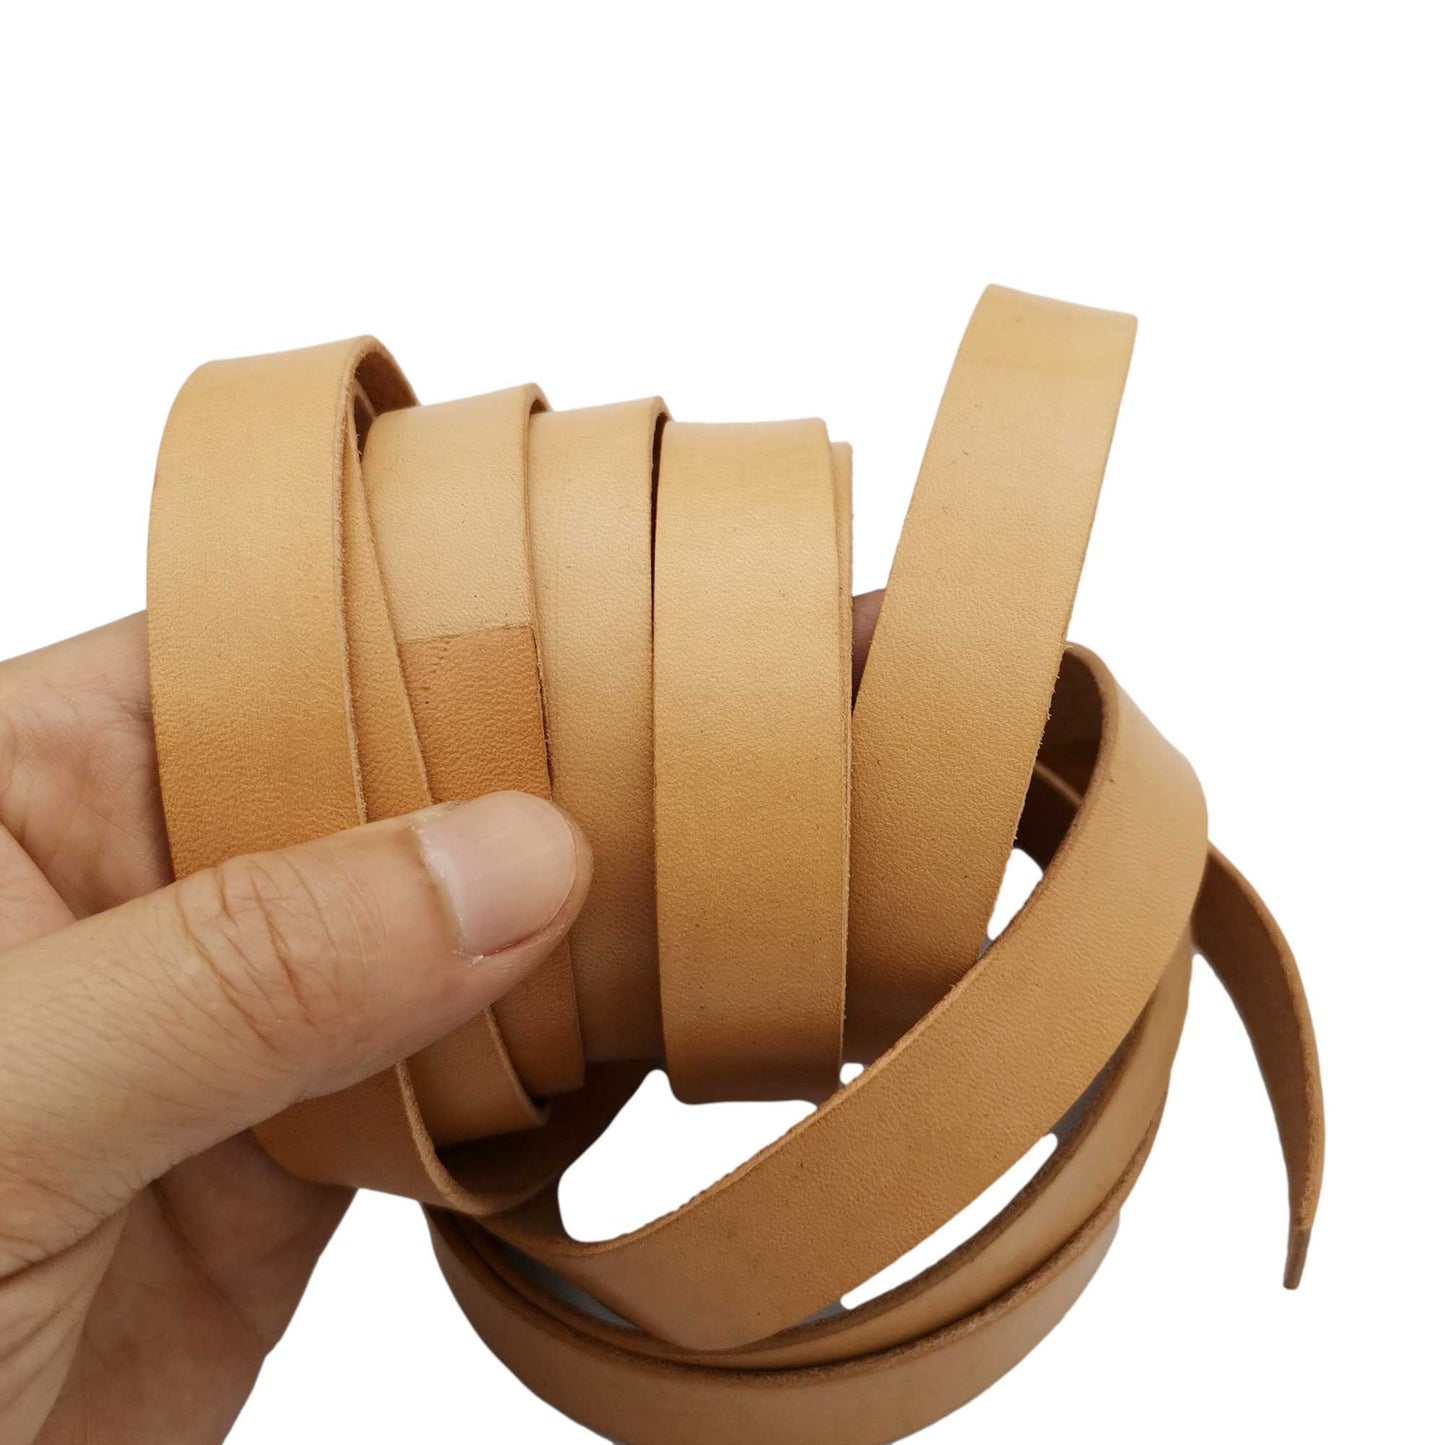 shapesbyX-18mm Flat Leather Strip 18x2mm Genuine Leather Band 2mm Thick Tan Natural